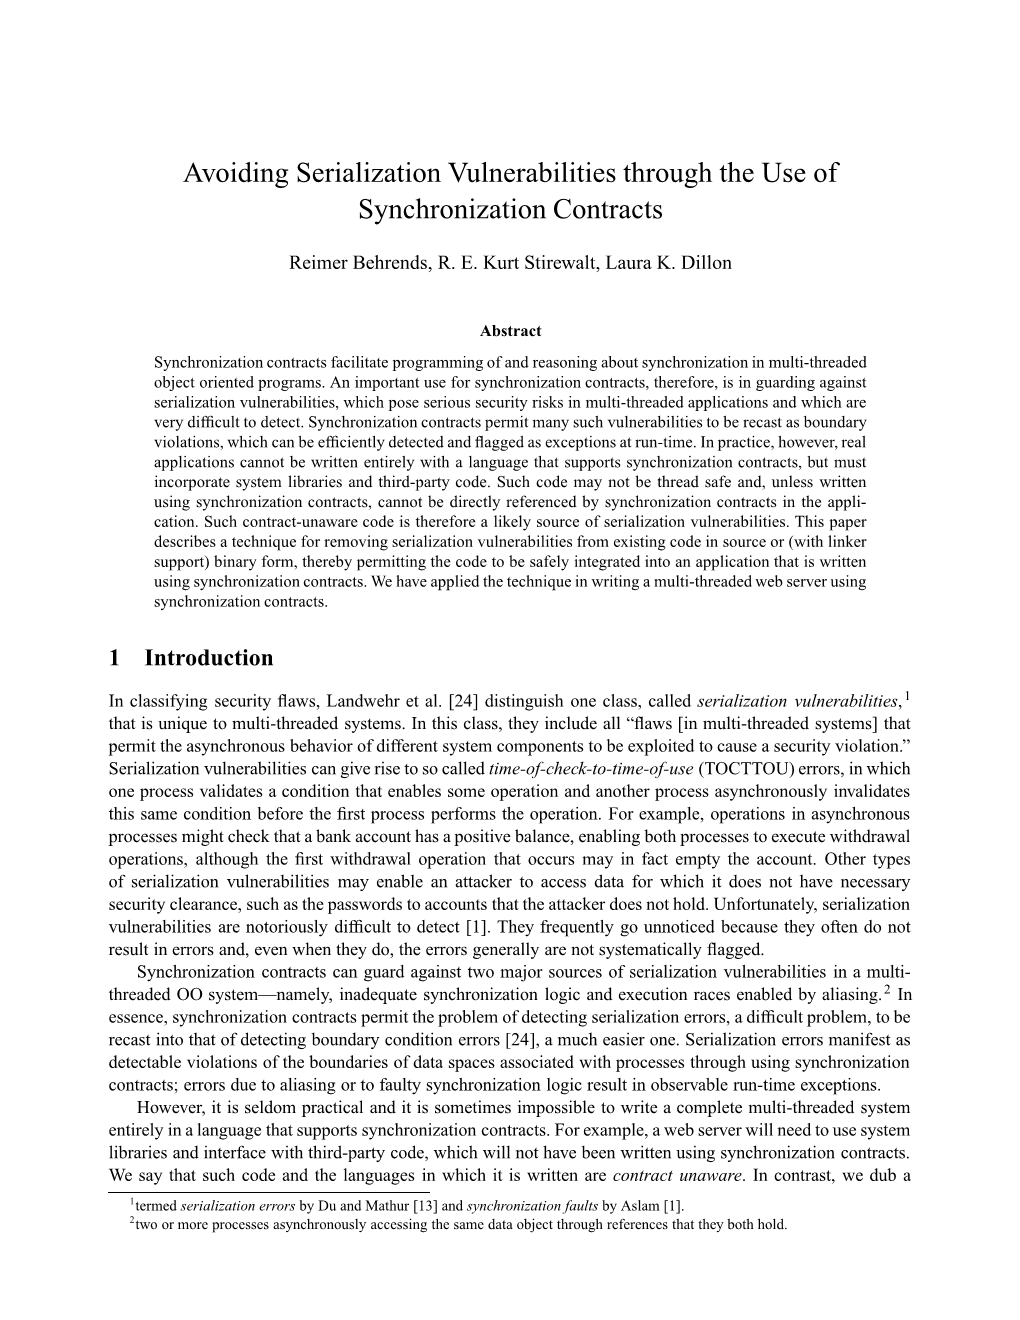 Avoiding Serialization Vulnerabilities Through the Use of Synchronization Contracts